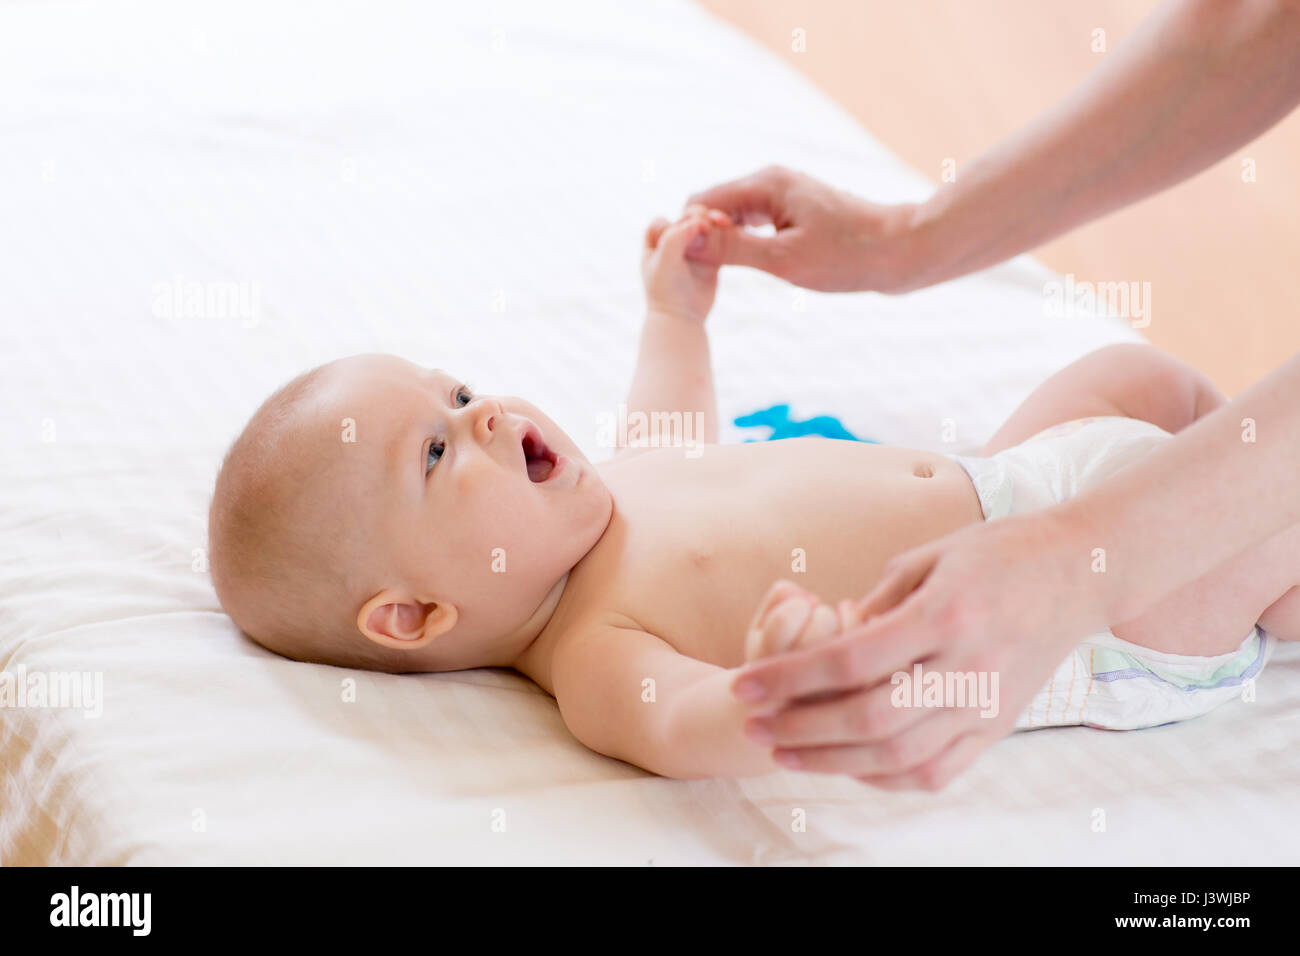 Mother or masseur massaging infant baby. Gymnastic, physical training, exercises for babies. Early development and health care concept. Stock Photo